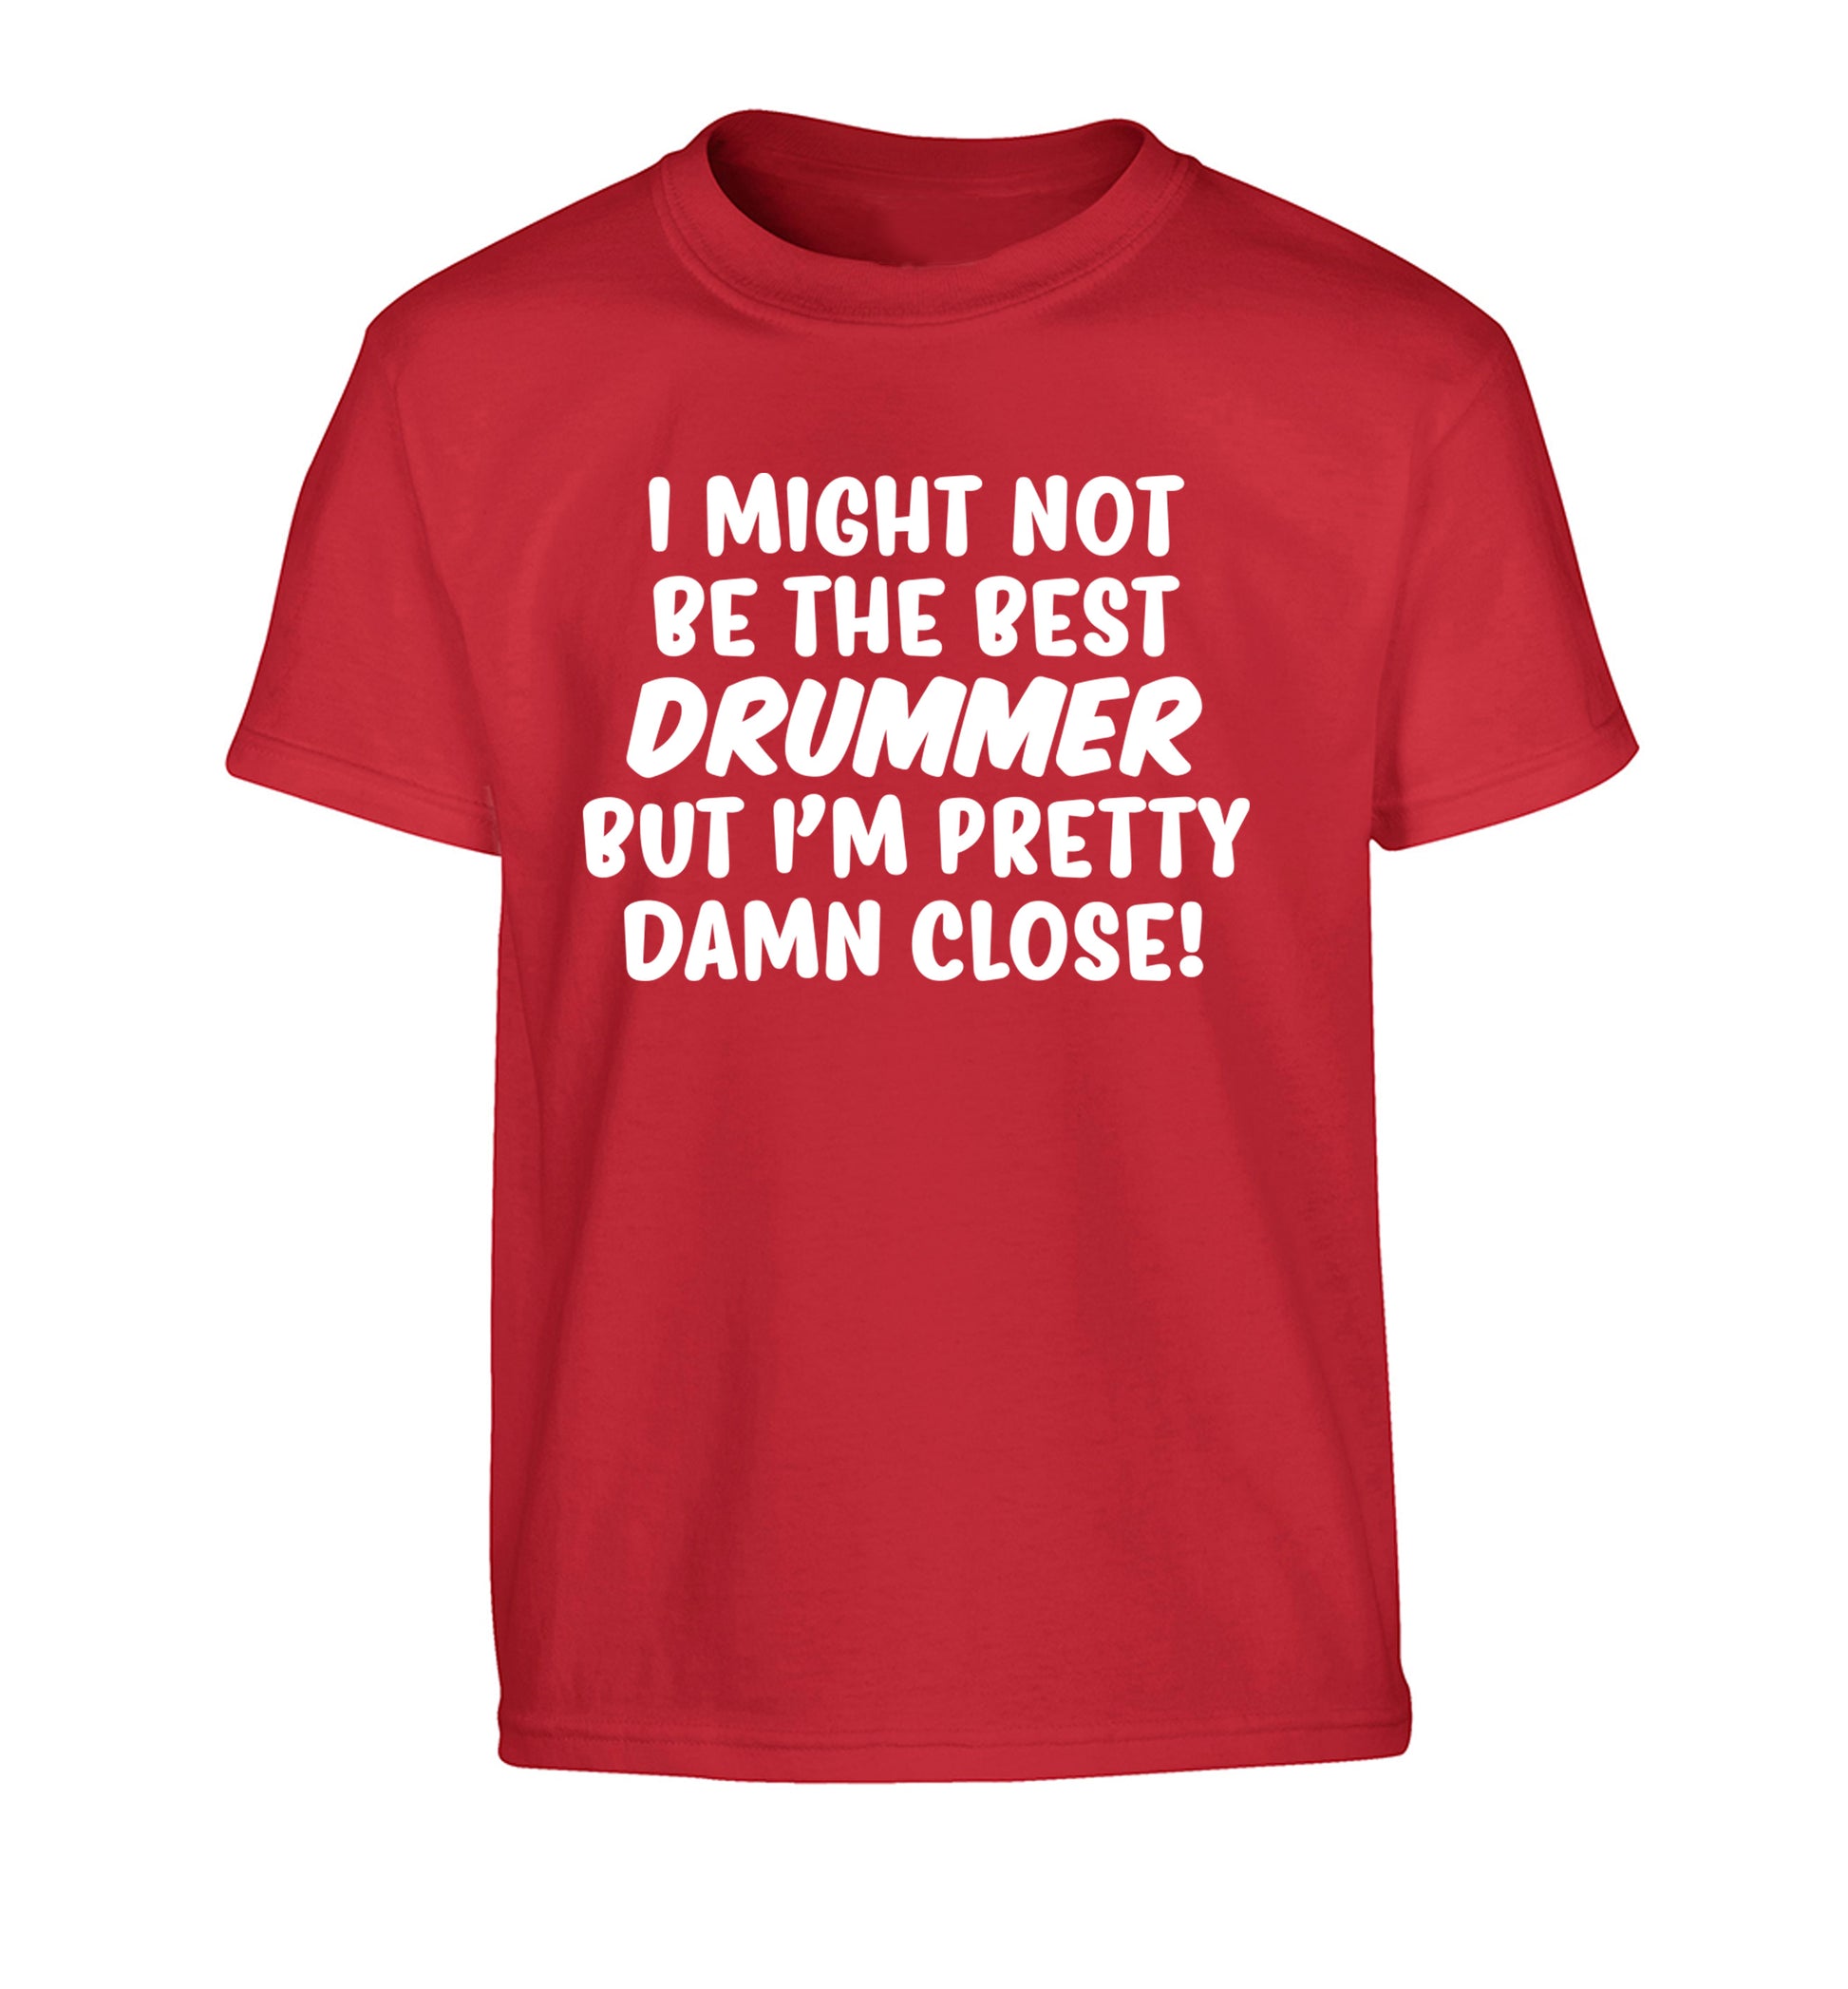 I might not be the best drummer but I'm pretty close! Children's red Tshirt 12-14 Years